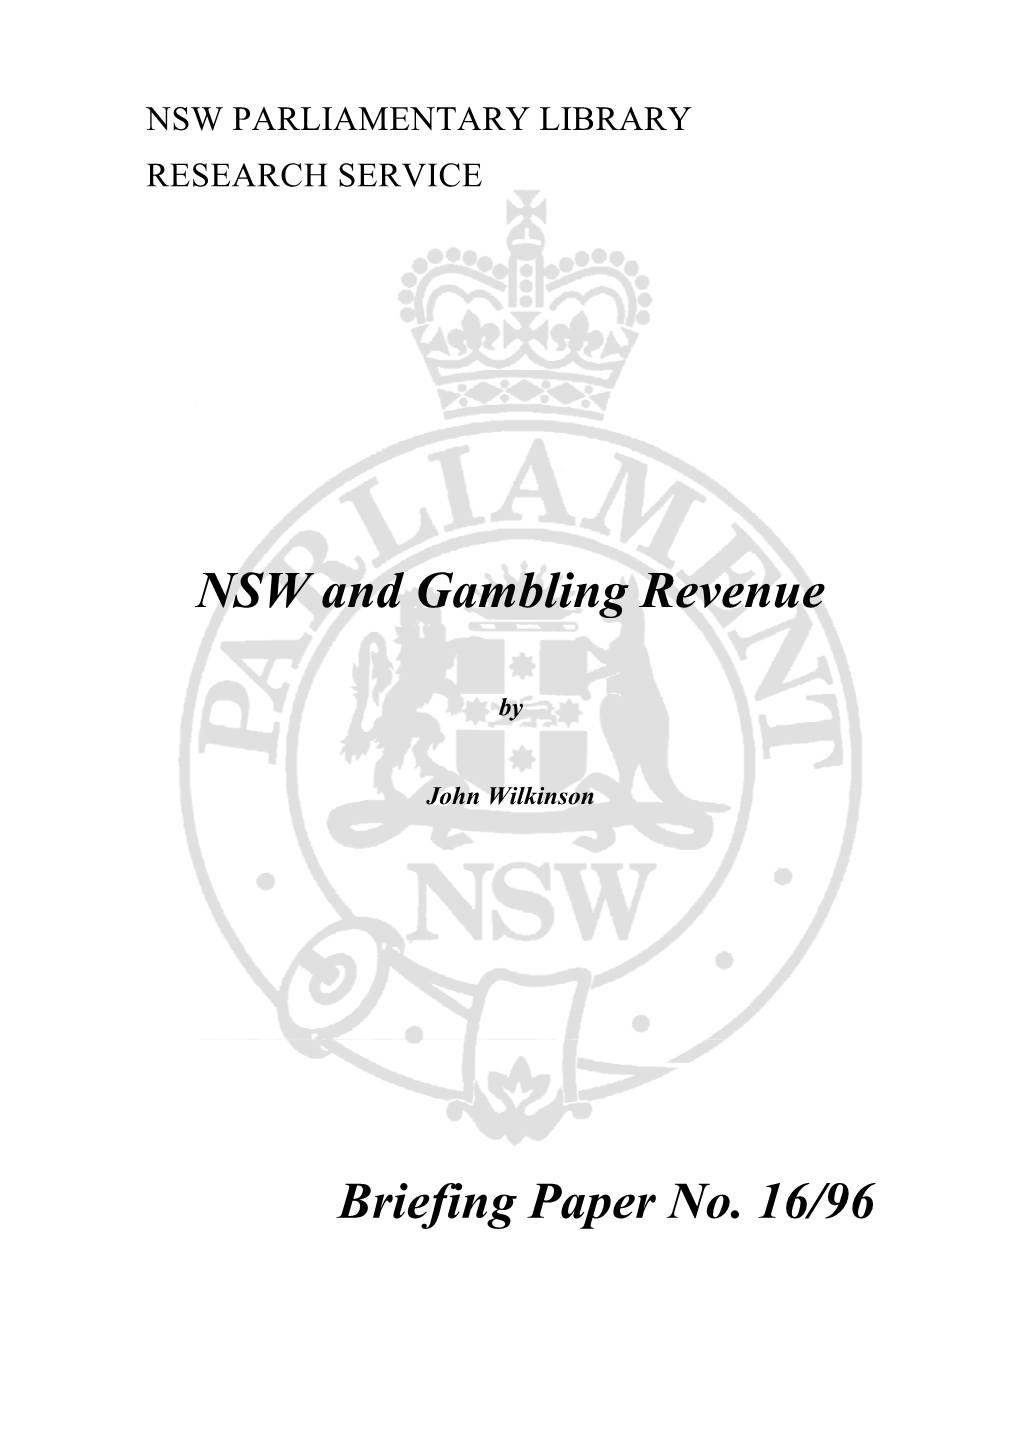 NSW and Gambling Revenue Briefing Paper No. 16/96